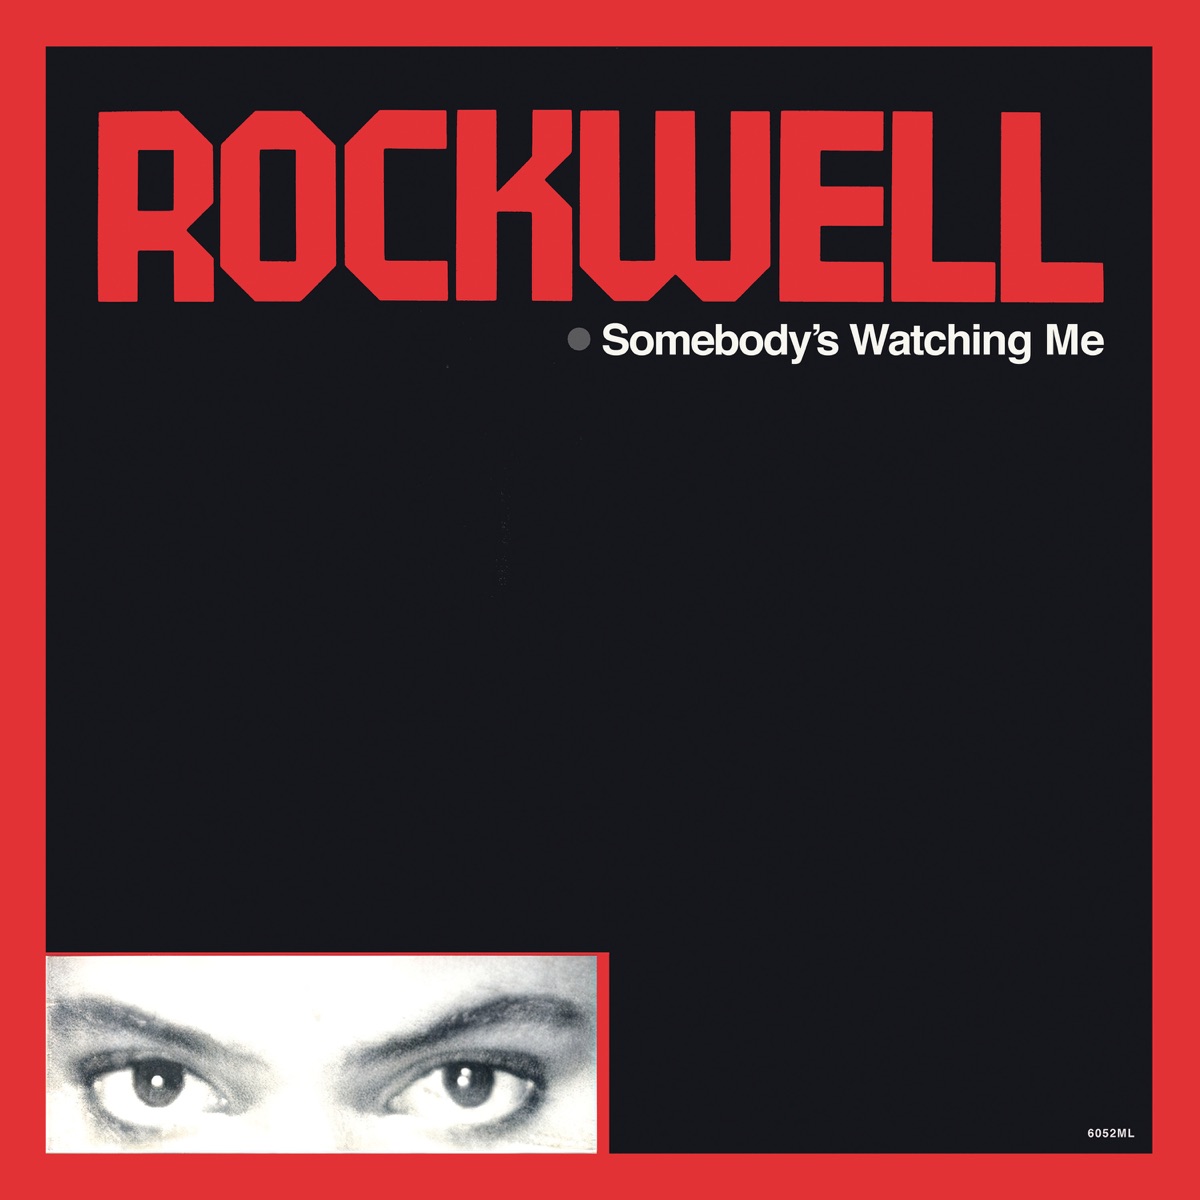 Rockwell [Somebody's Watching Me] 1984년